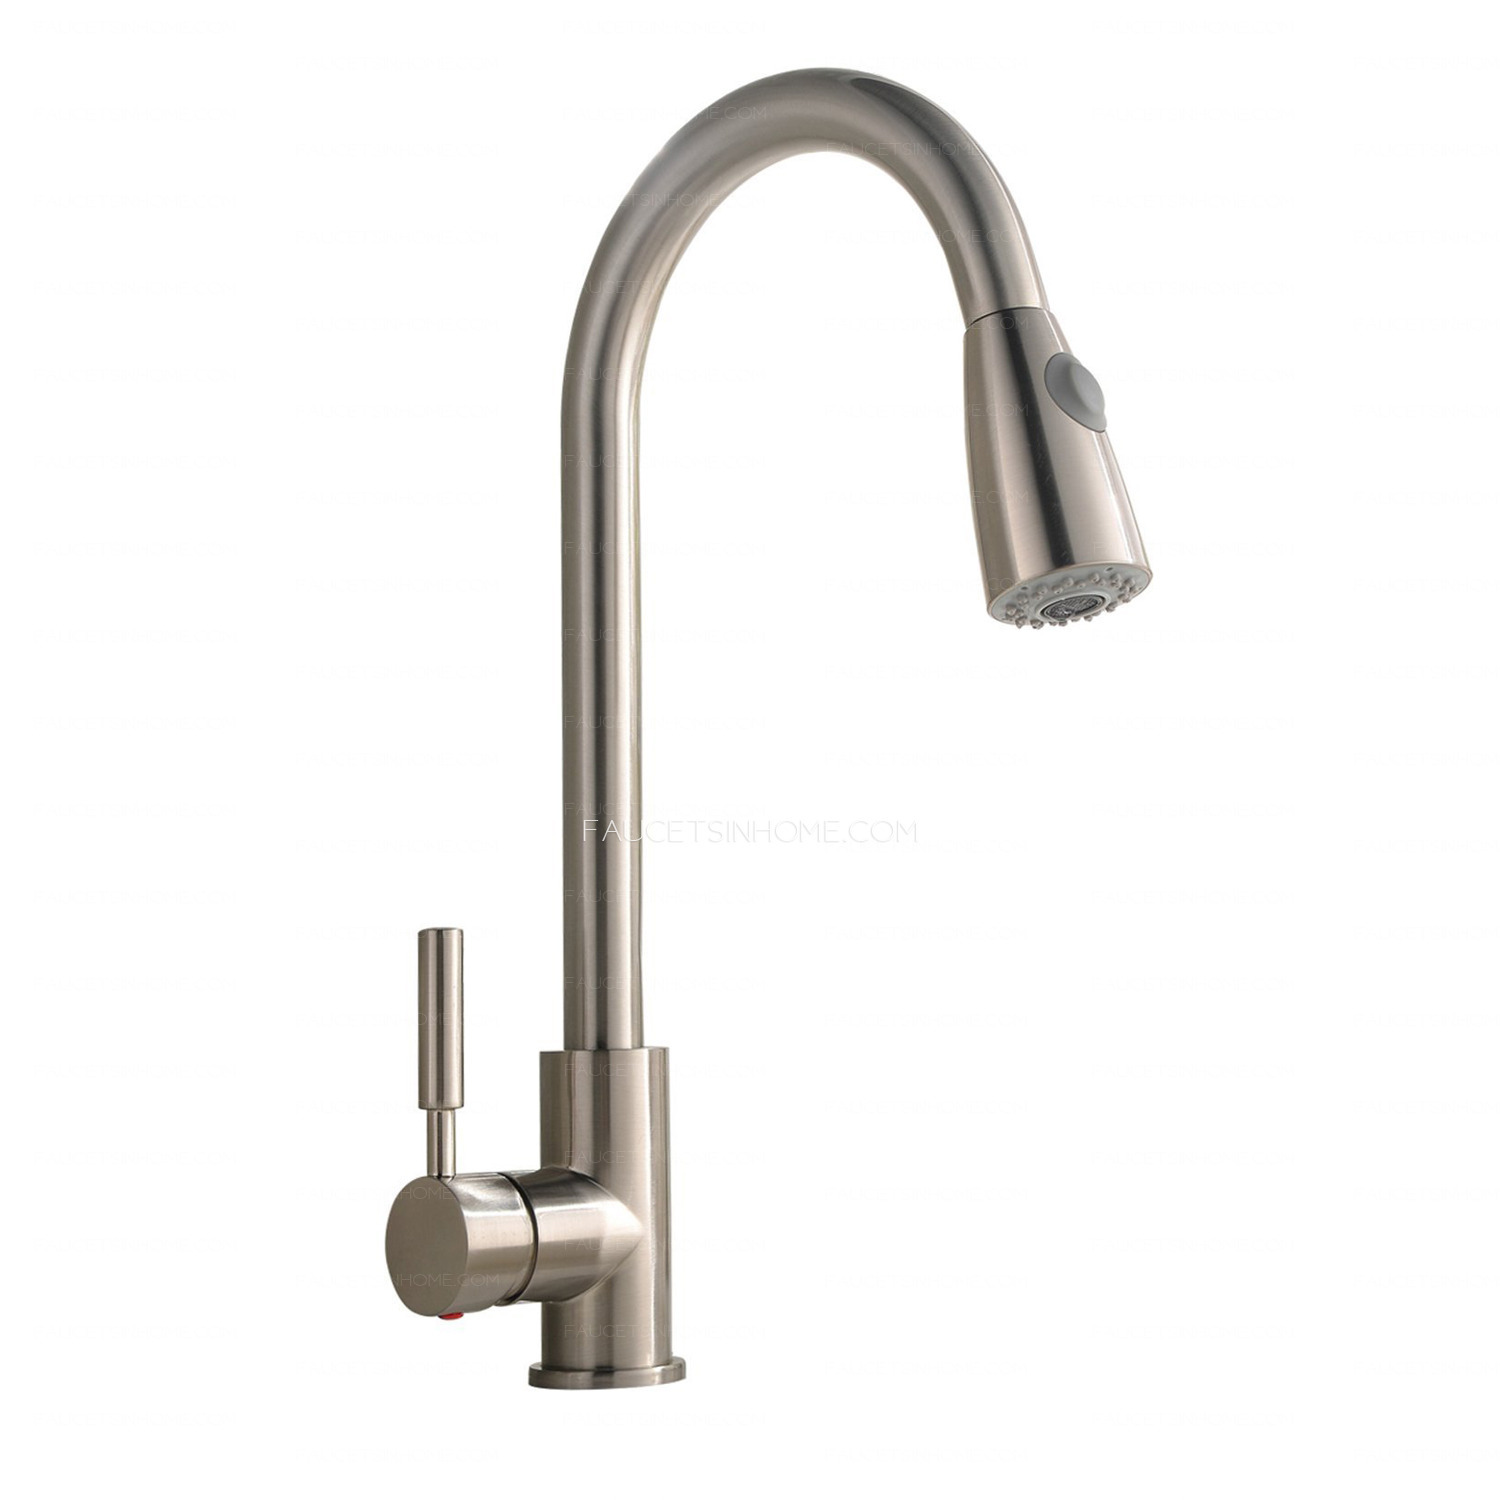 Brushed Nickel Rotatable Brass Pull Down Commercial Kitchen Faucet With Sprayer FTH1803140942333 1 